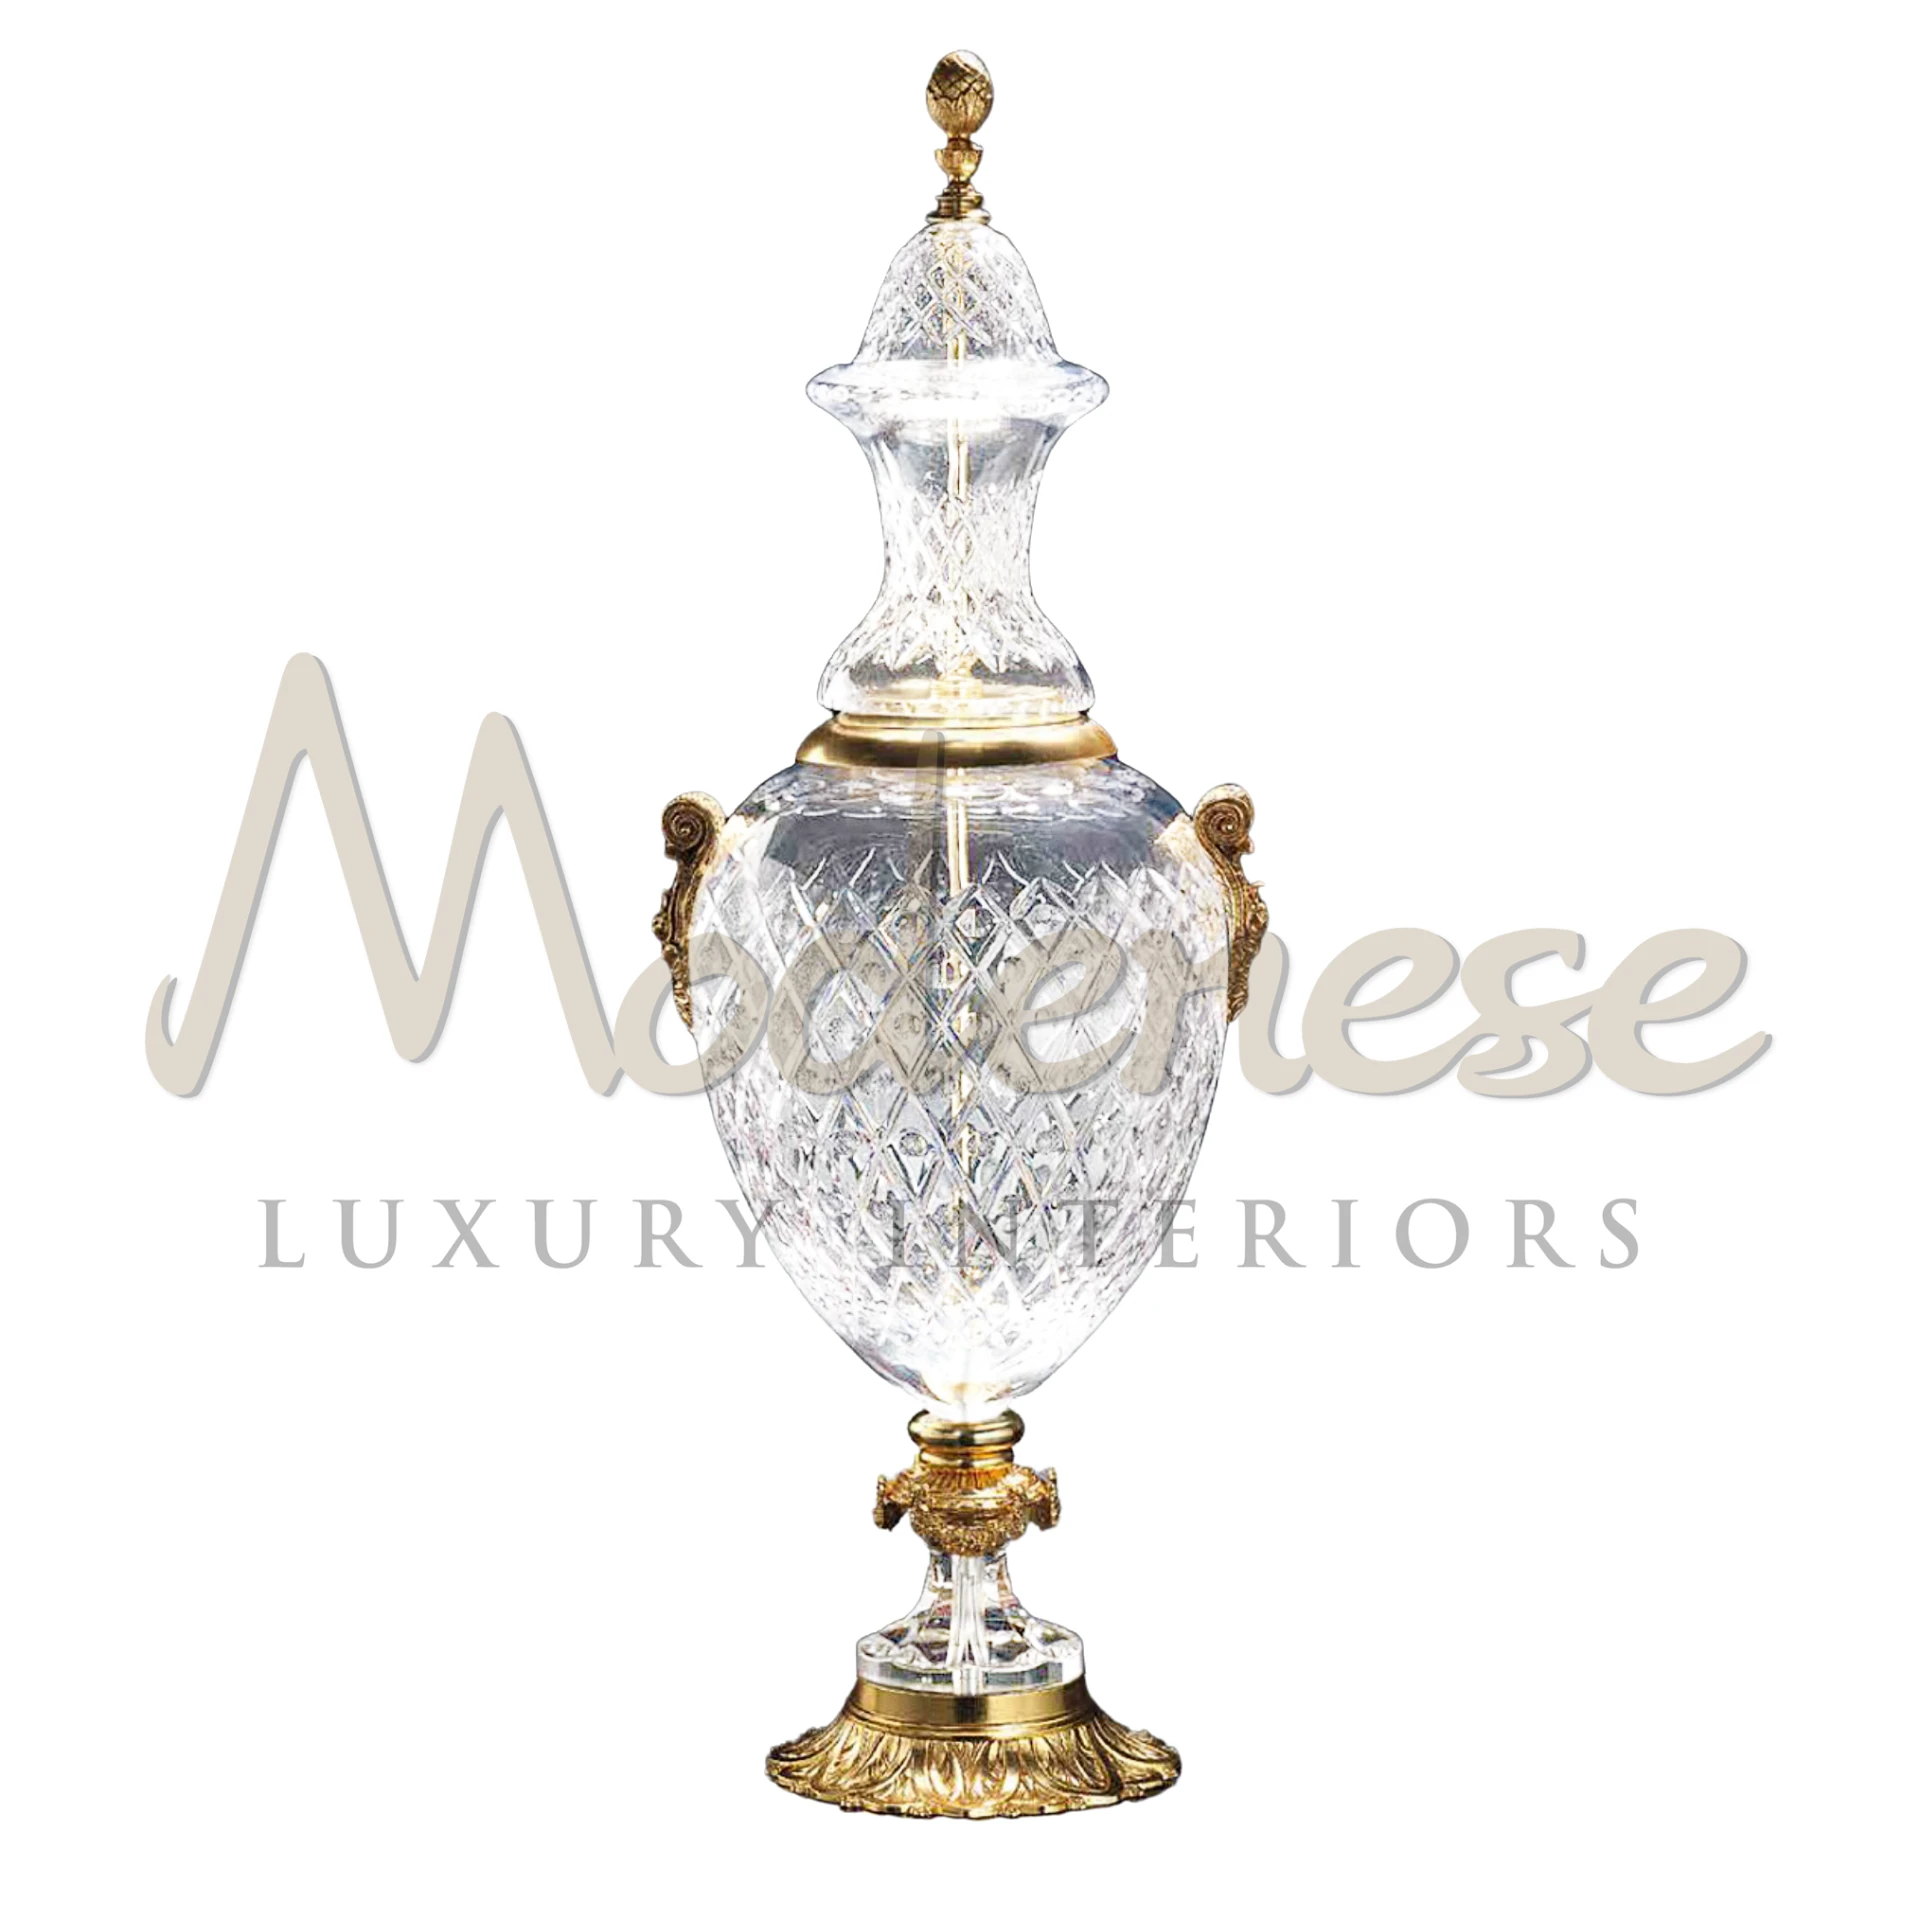 Giant Tall Crystal Amphora, embodying luxury with high-quality crystal and intricate detailing, perfect for making a grand statement.